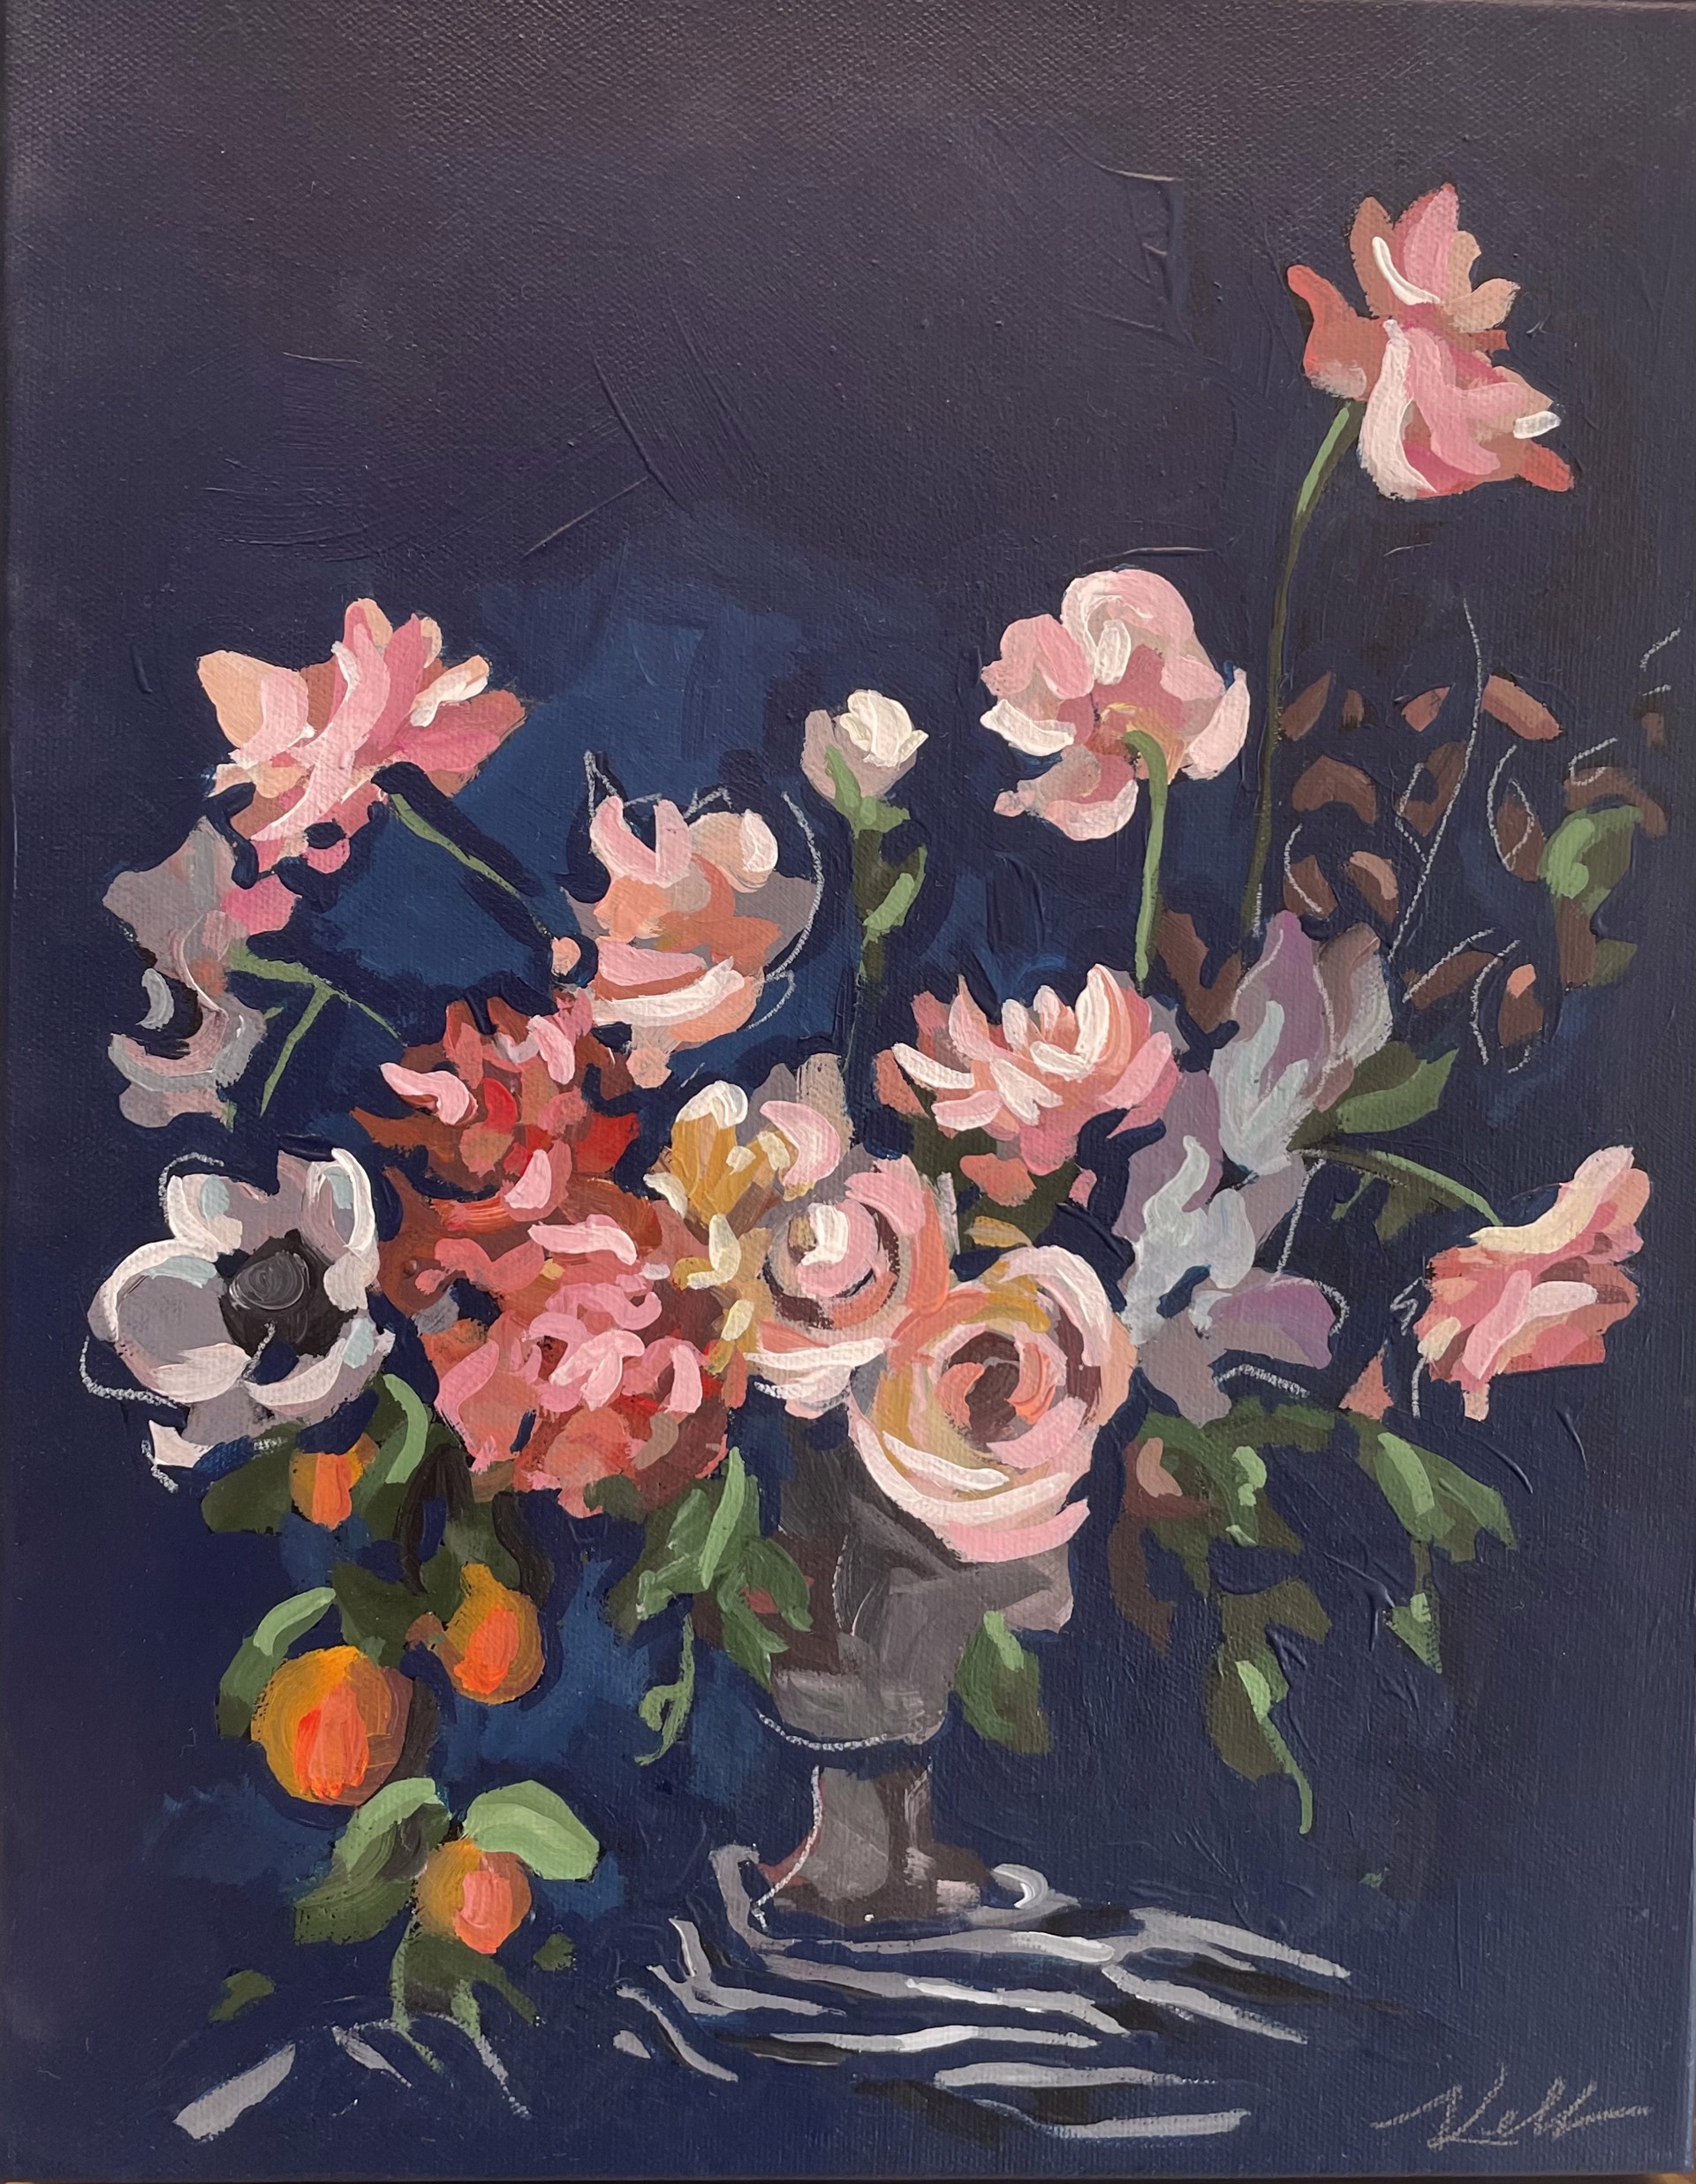 Oranges and Roses by Kellie Newsome